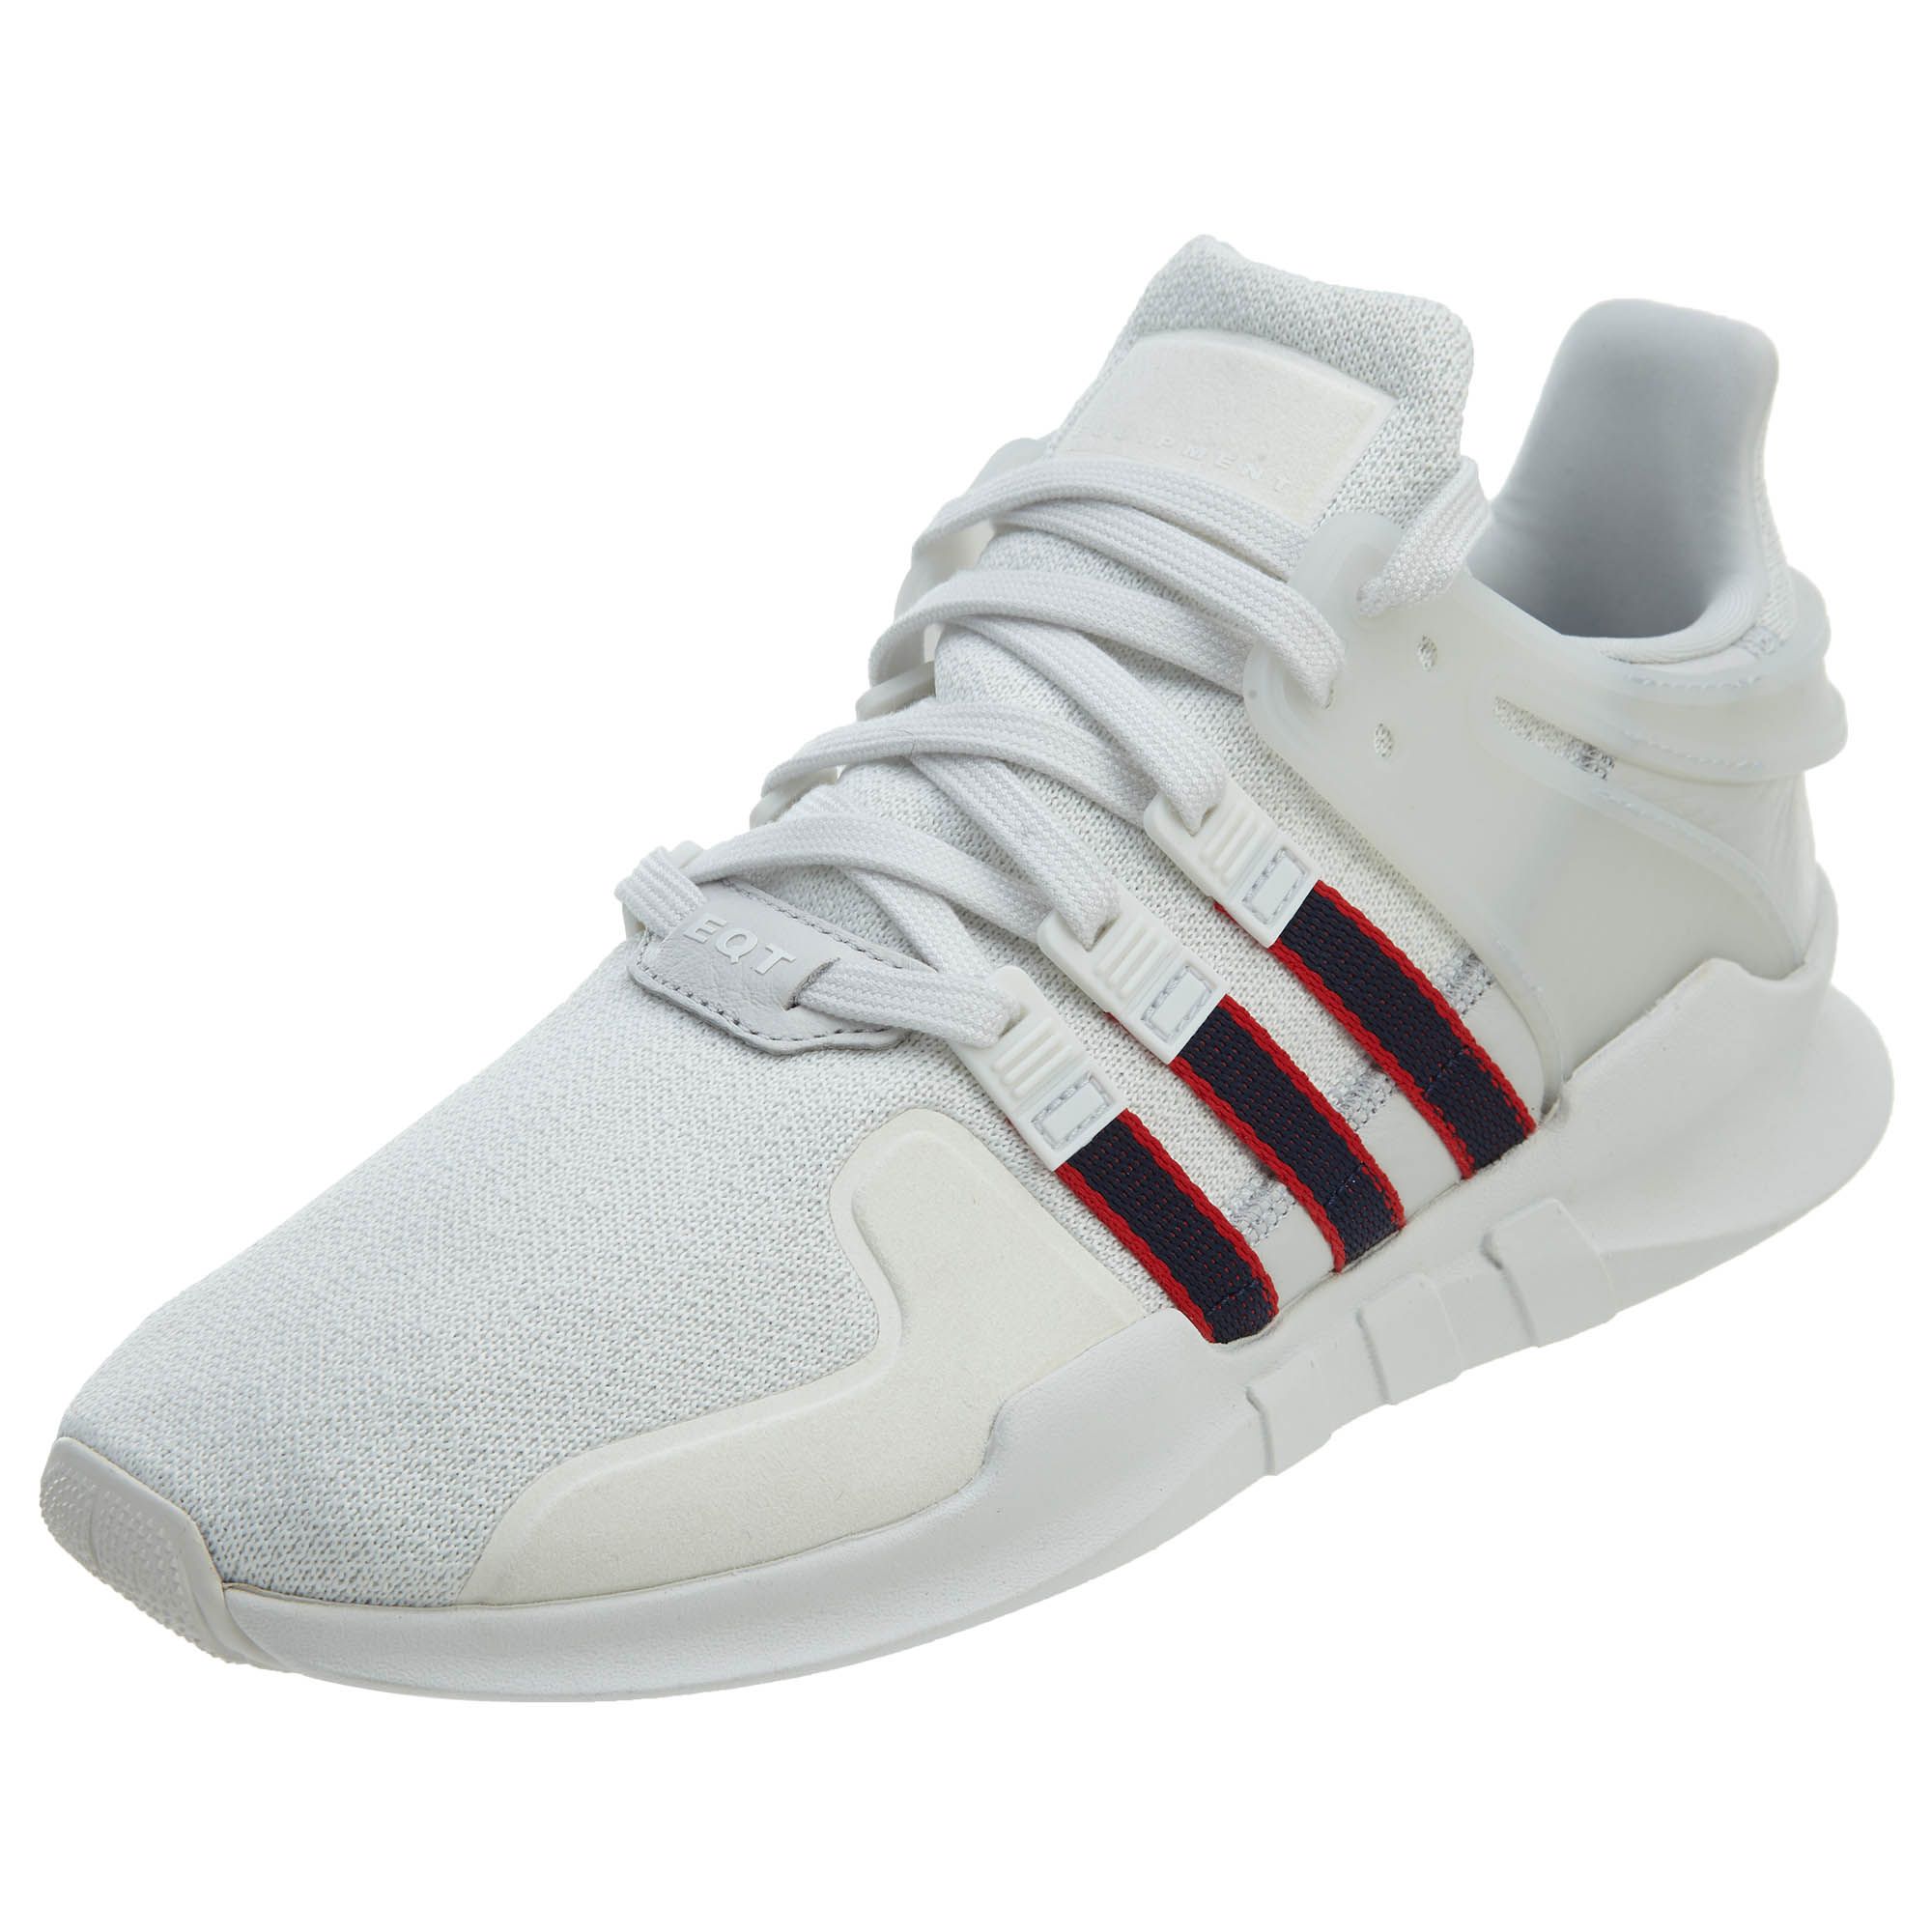 Adidas Eqt Support Adv Mens Style : Bb6778-CRYWHT/CONAVY/SCARLE